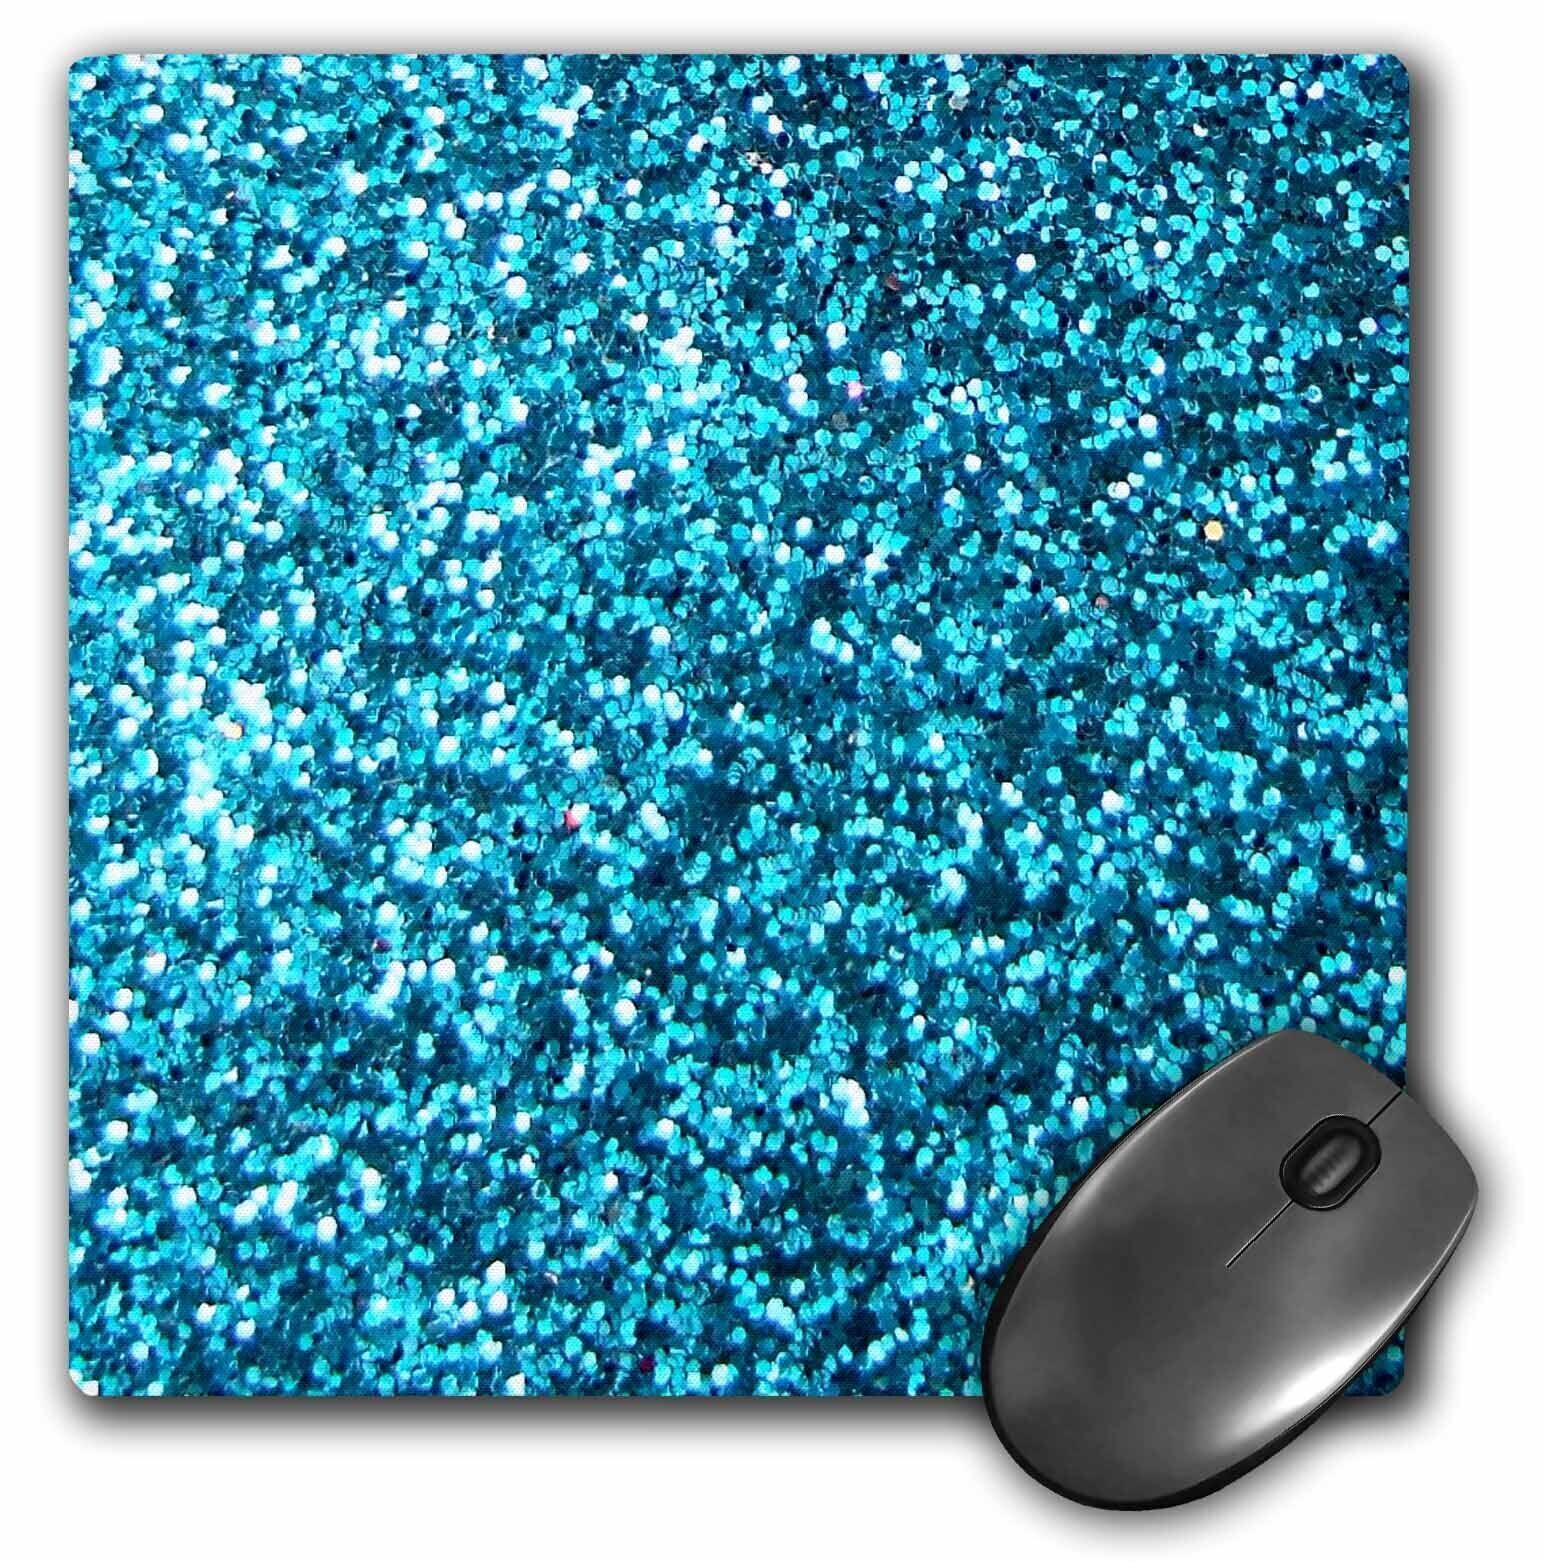 3dRose Blue Faux Glitter - photo of glittery texture - looks like sparkly bling